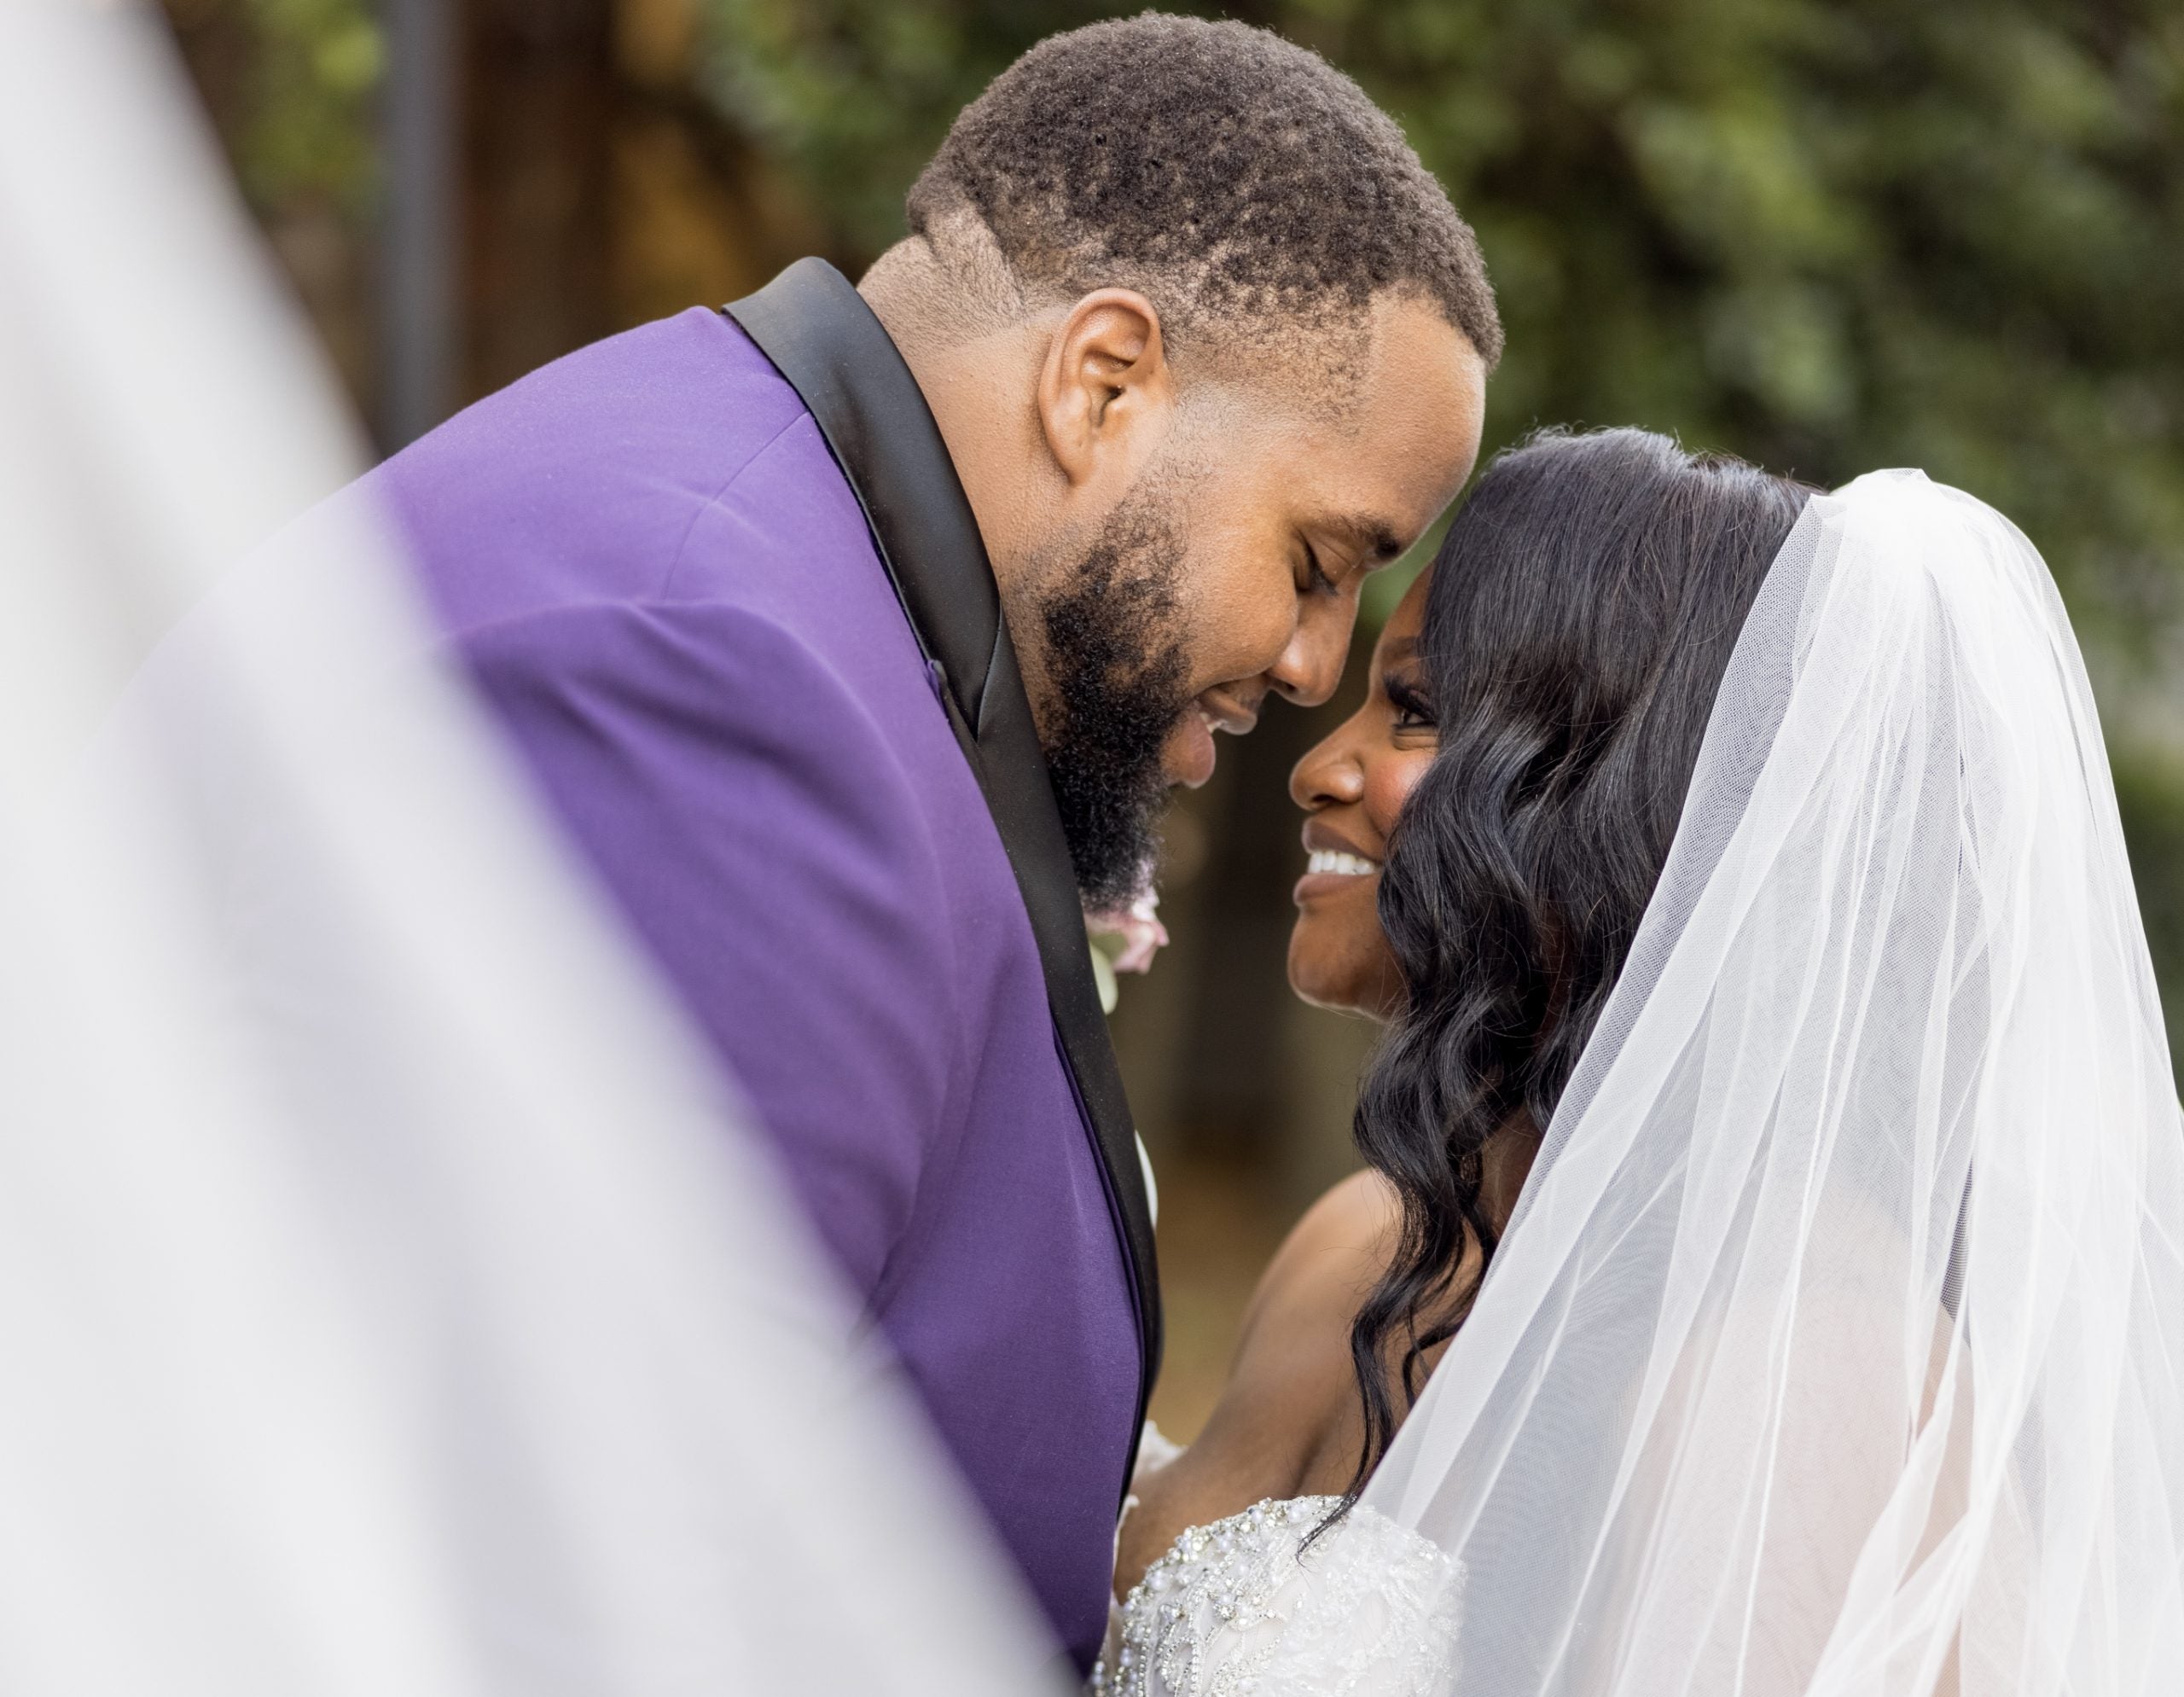 Bridal Bliss: After Fixing Her Love Life With Help From Iyanla Vanzant,  Christal Said 'I Do' To Adrian In A Garden Wedding In Atlanta